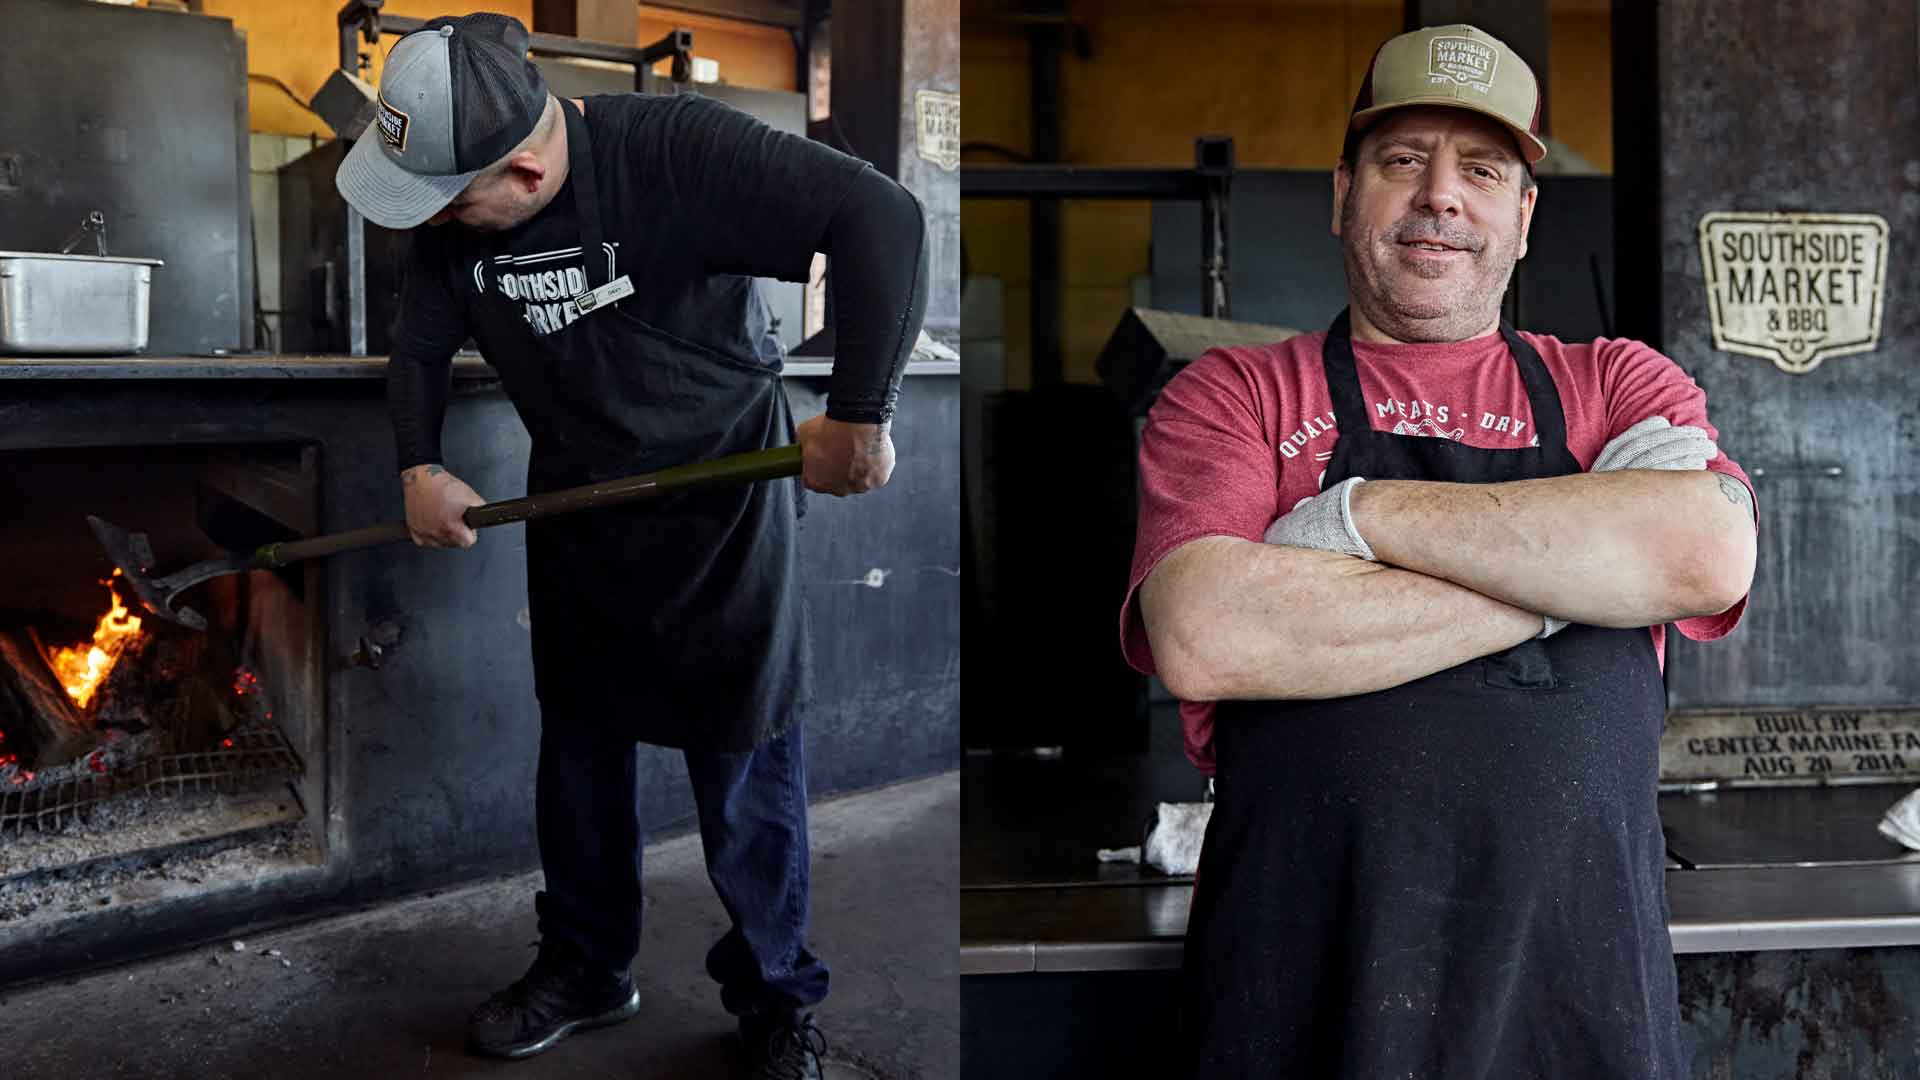 Lifestyle photography of a couple of BBQ pit managers at Southside Market & Barbequie